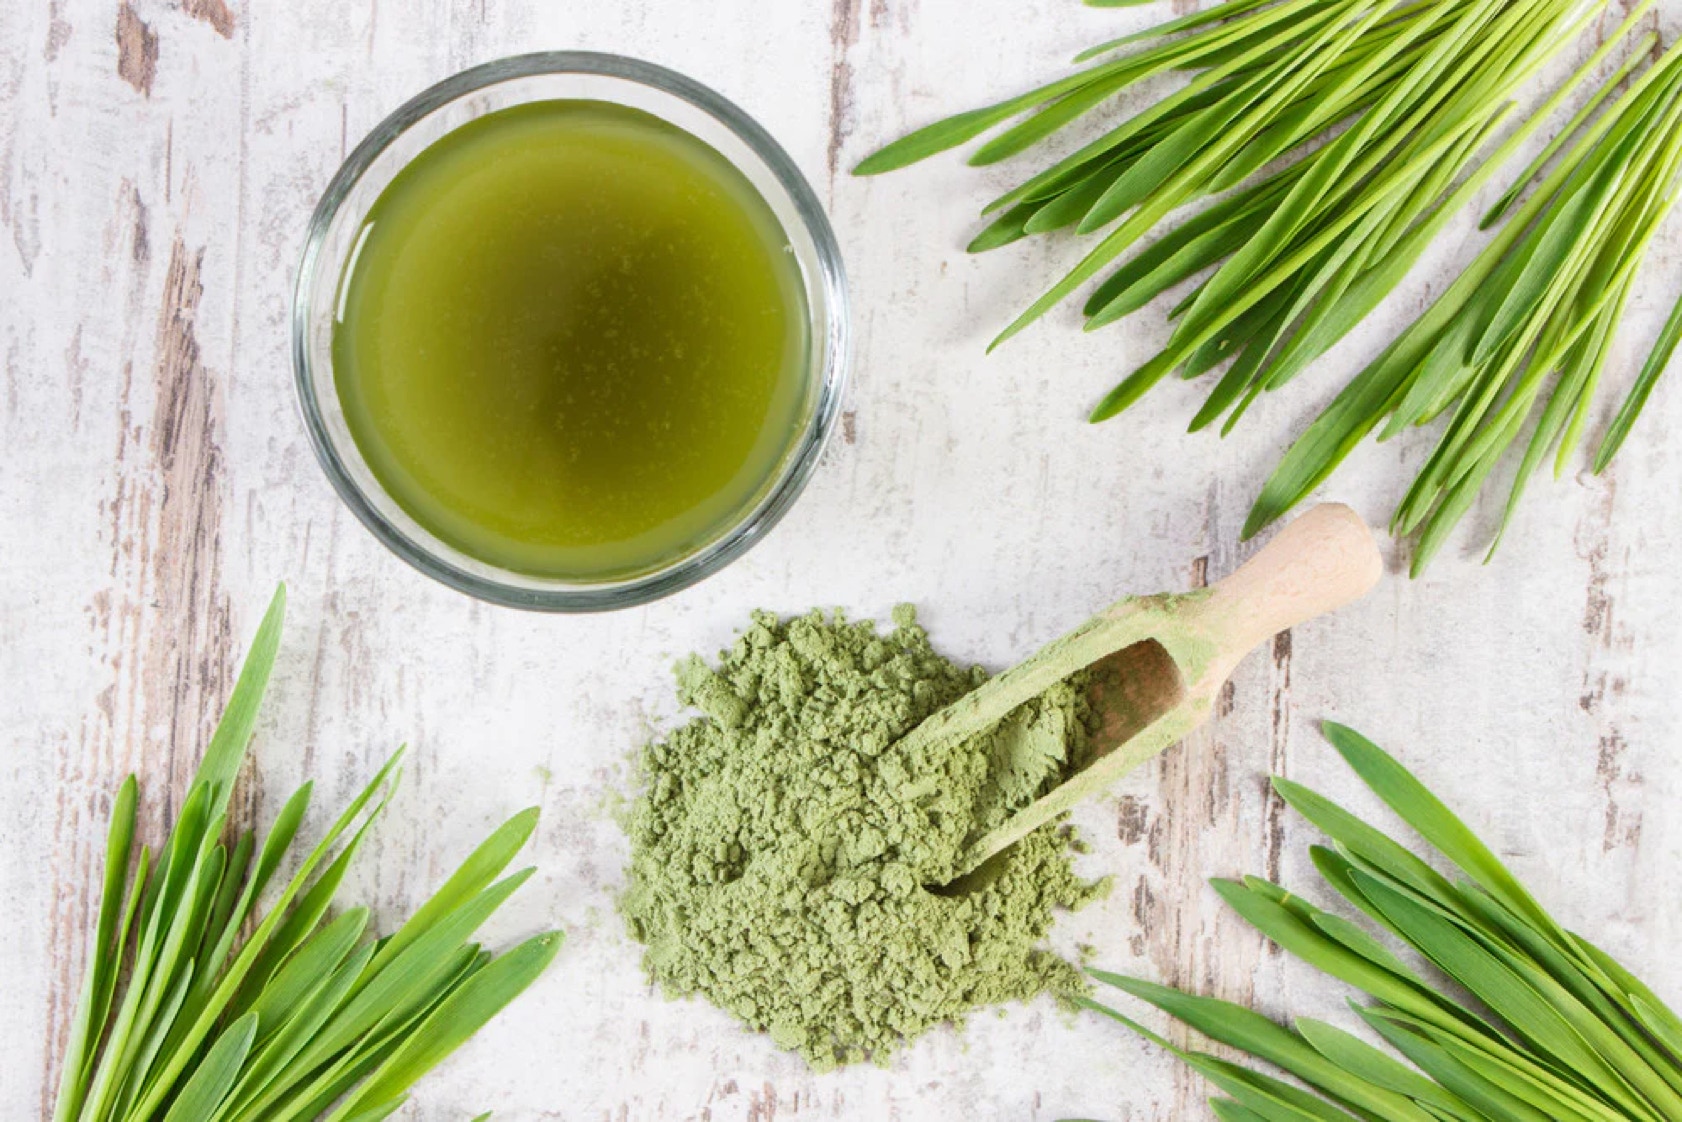 Looking for a nutritious and versatile food? Barley grass is a rich source of vitamins, minerals, antioxidants, protein and fiber. Harvested before maturity.